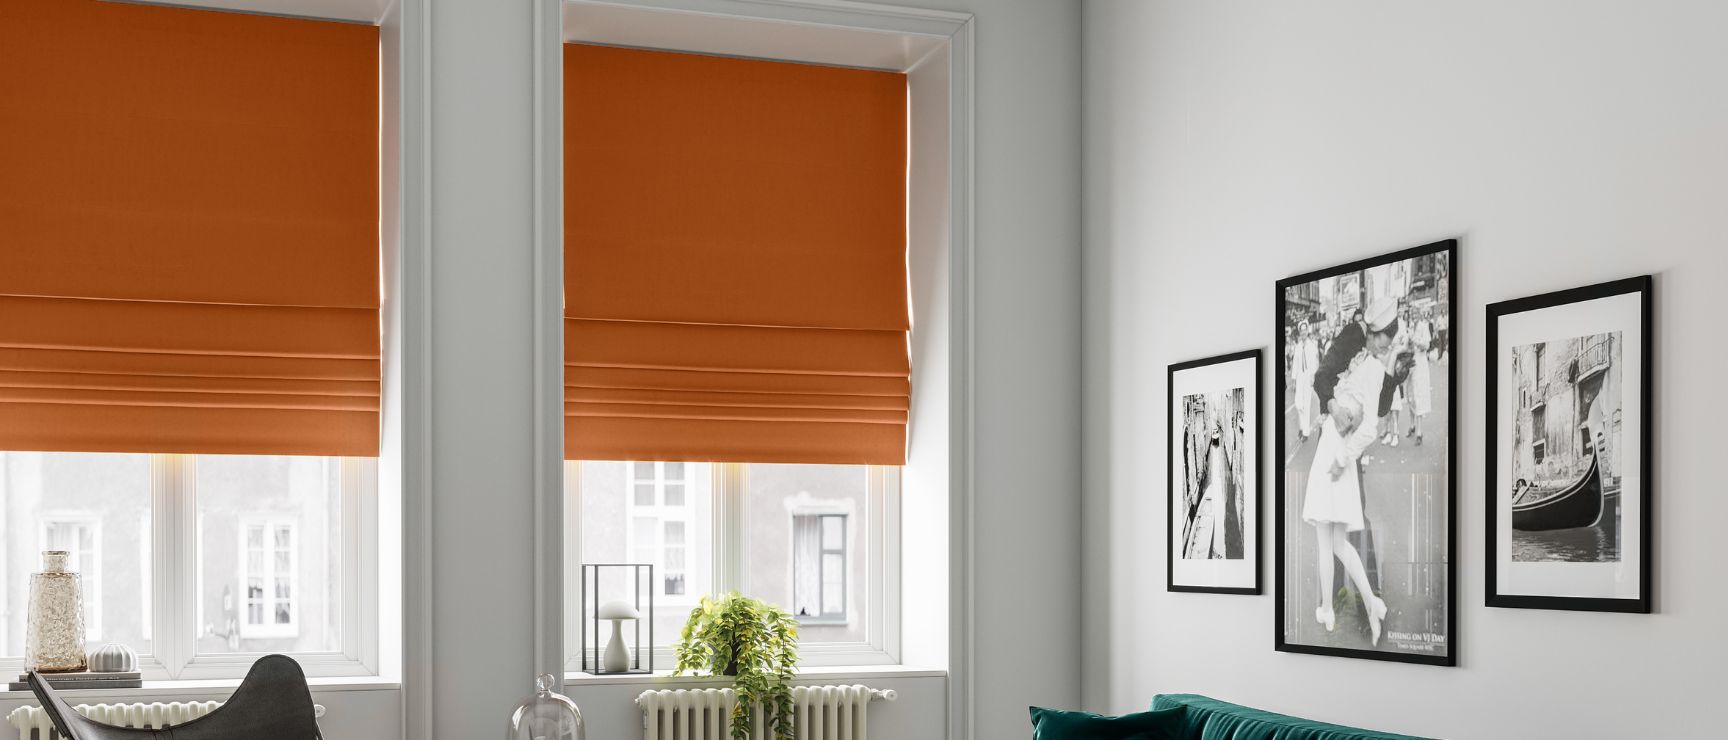 Modern Blind Ideas for Your Home